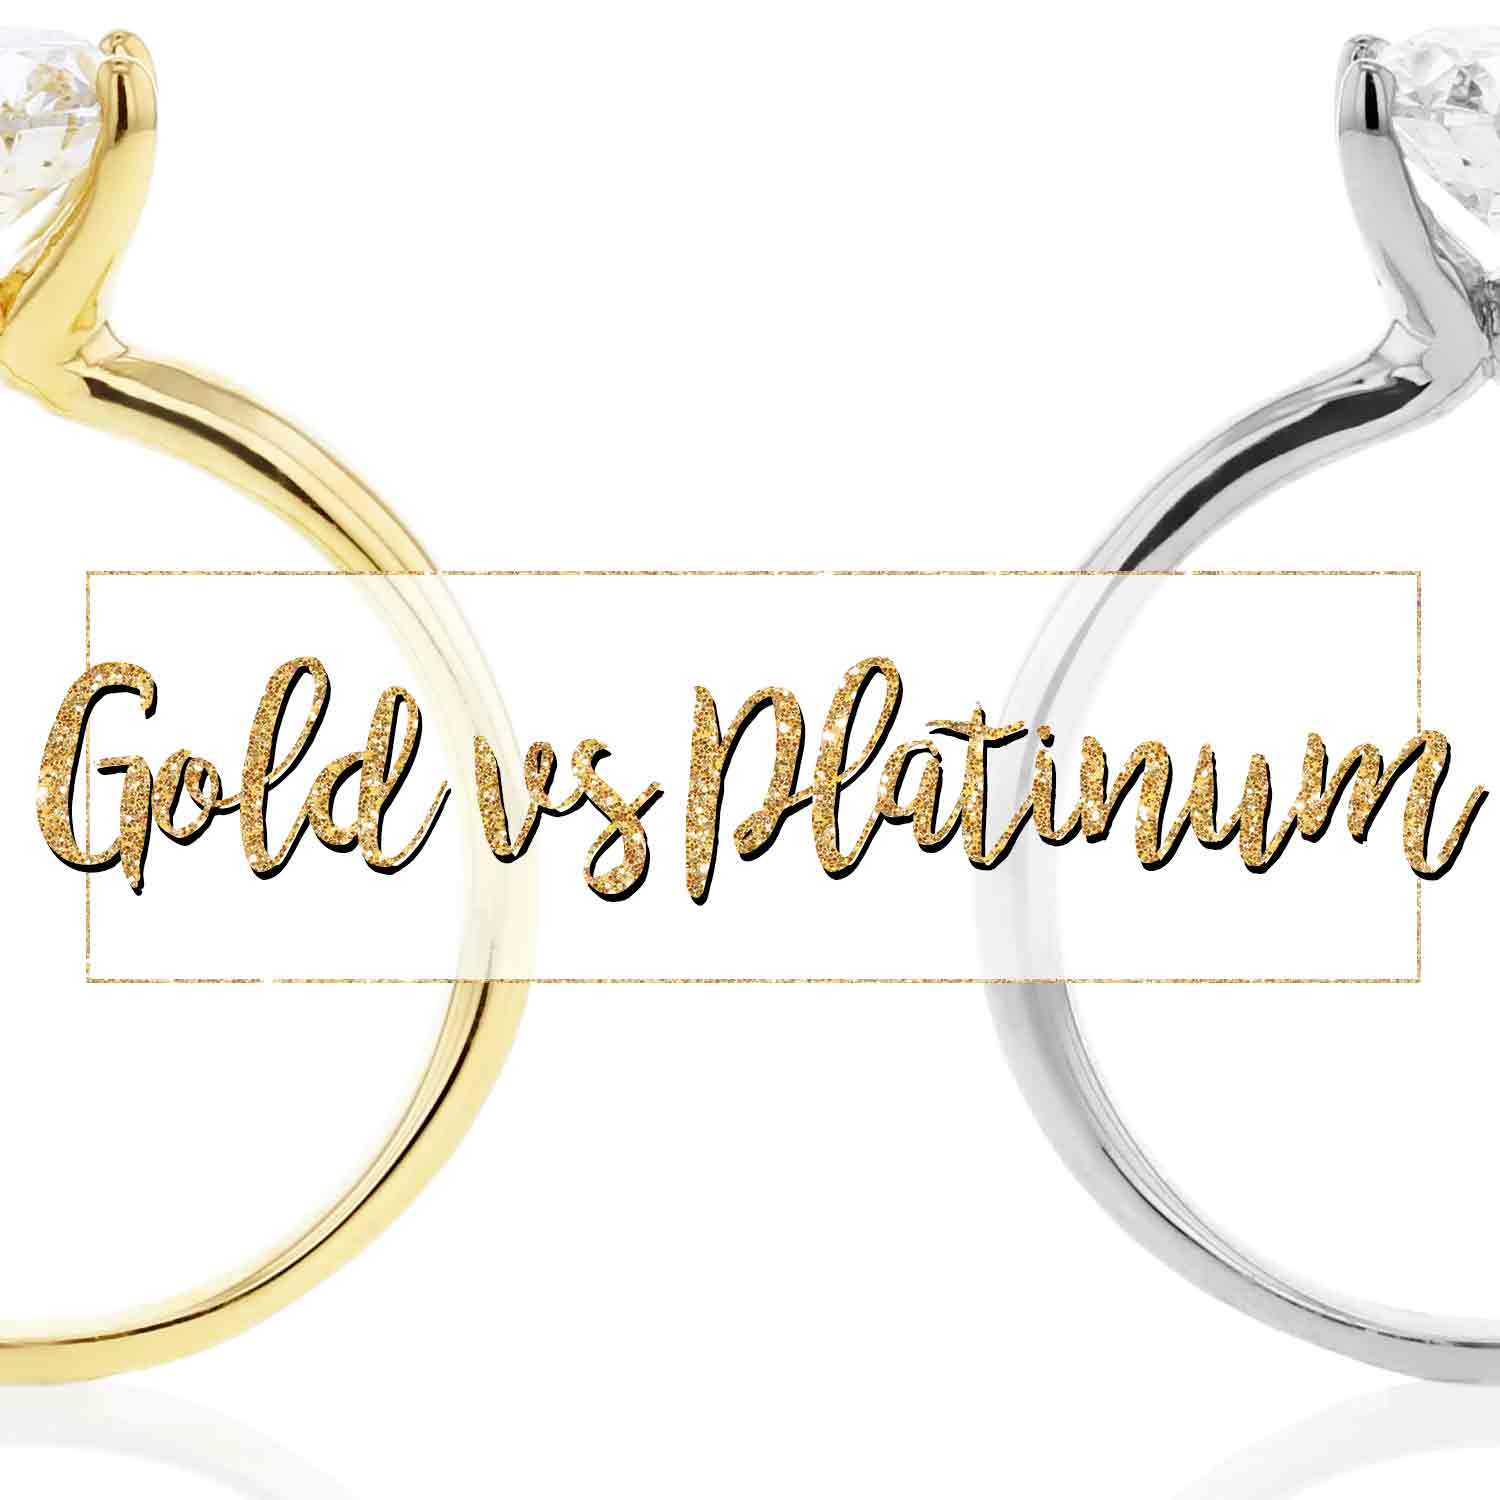 A gold ring on the left and a platinum ring on the right.